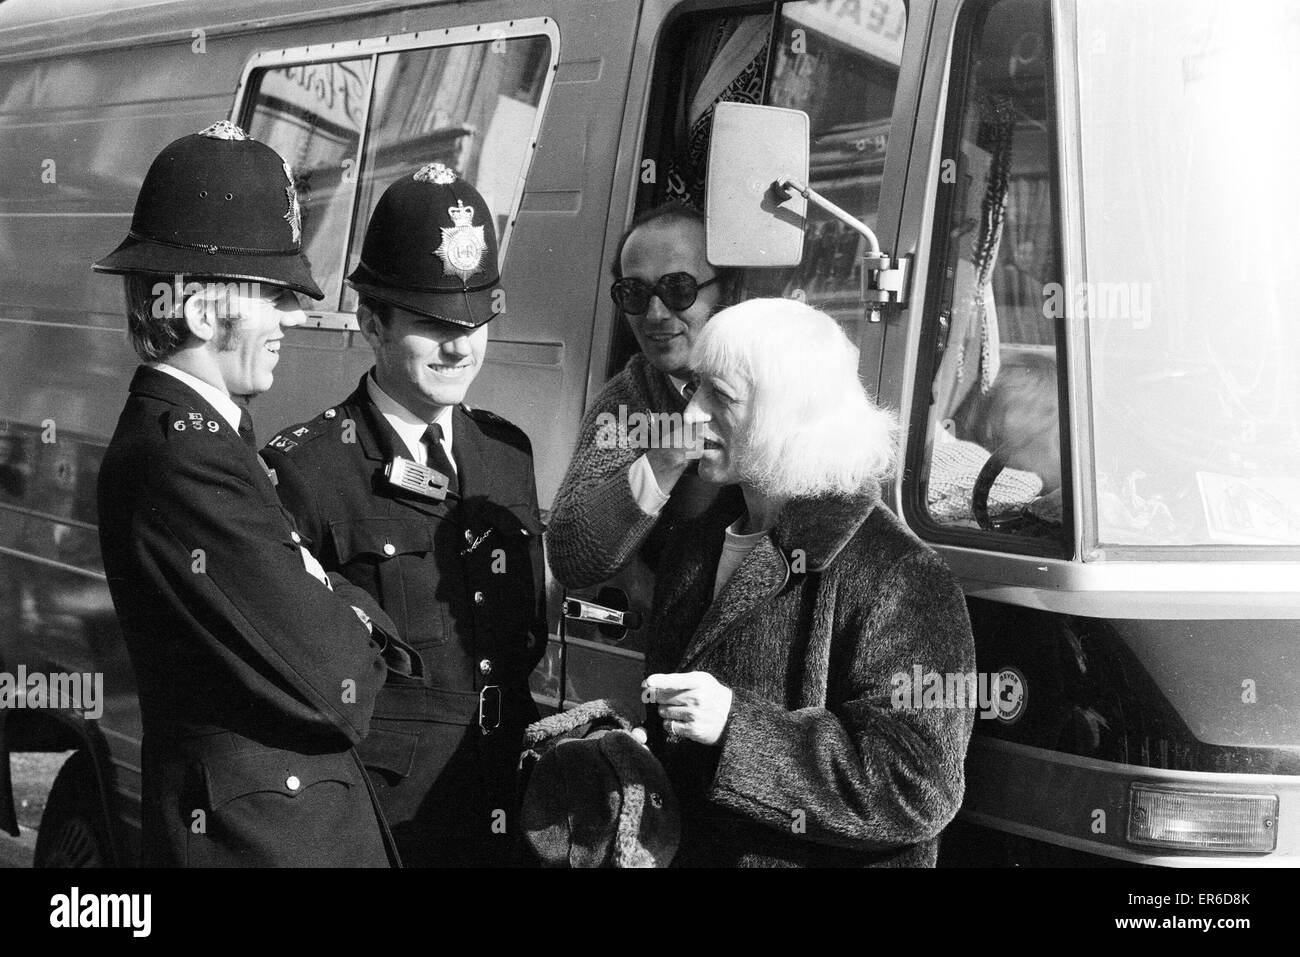 'A day in the life of Jimmy Saville' Feature by Mike Hellicar.  Here he is pictured talking to police officers beside his motor home caravan outside Kings Cross railway station. 7th October 1971. Stock Photo